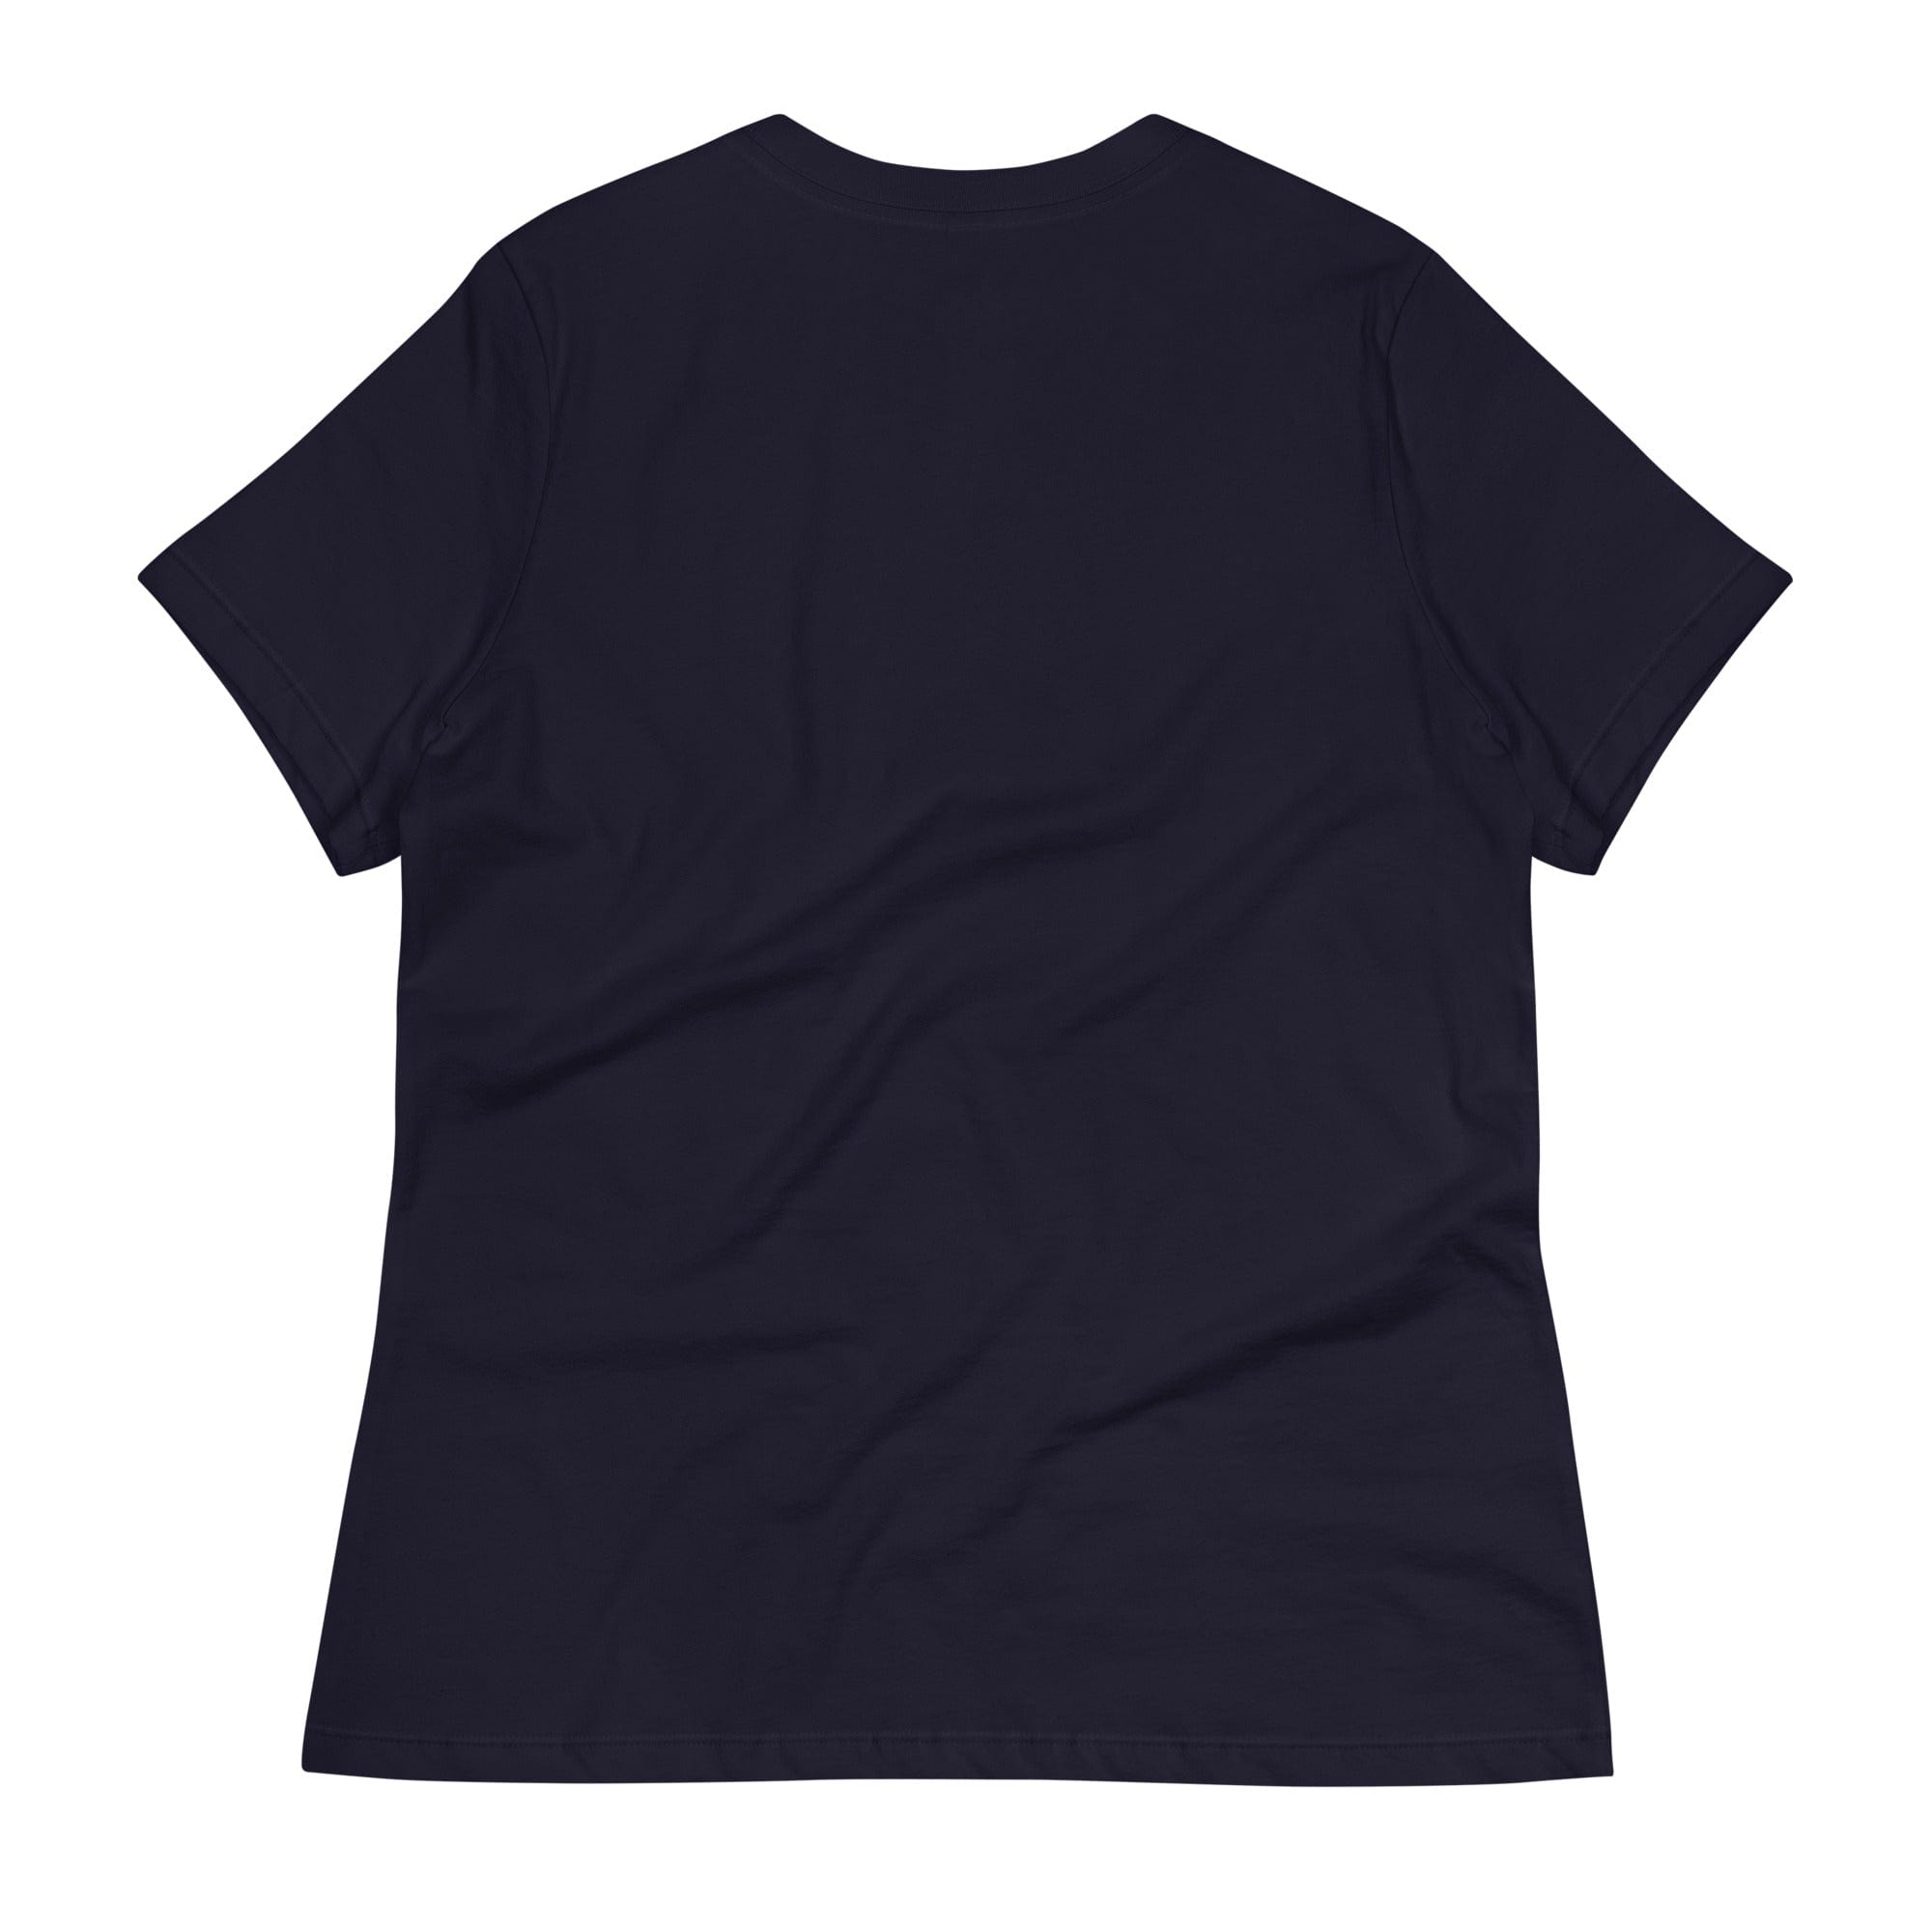 Spruced Roost Panta T-shirt - Women's Relaxed T-Shirt -  S-3XL